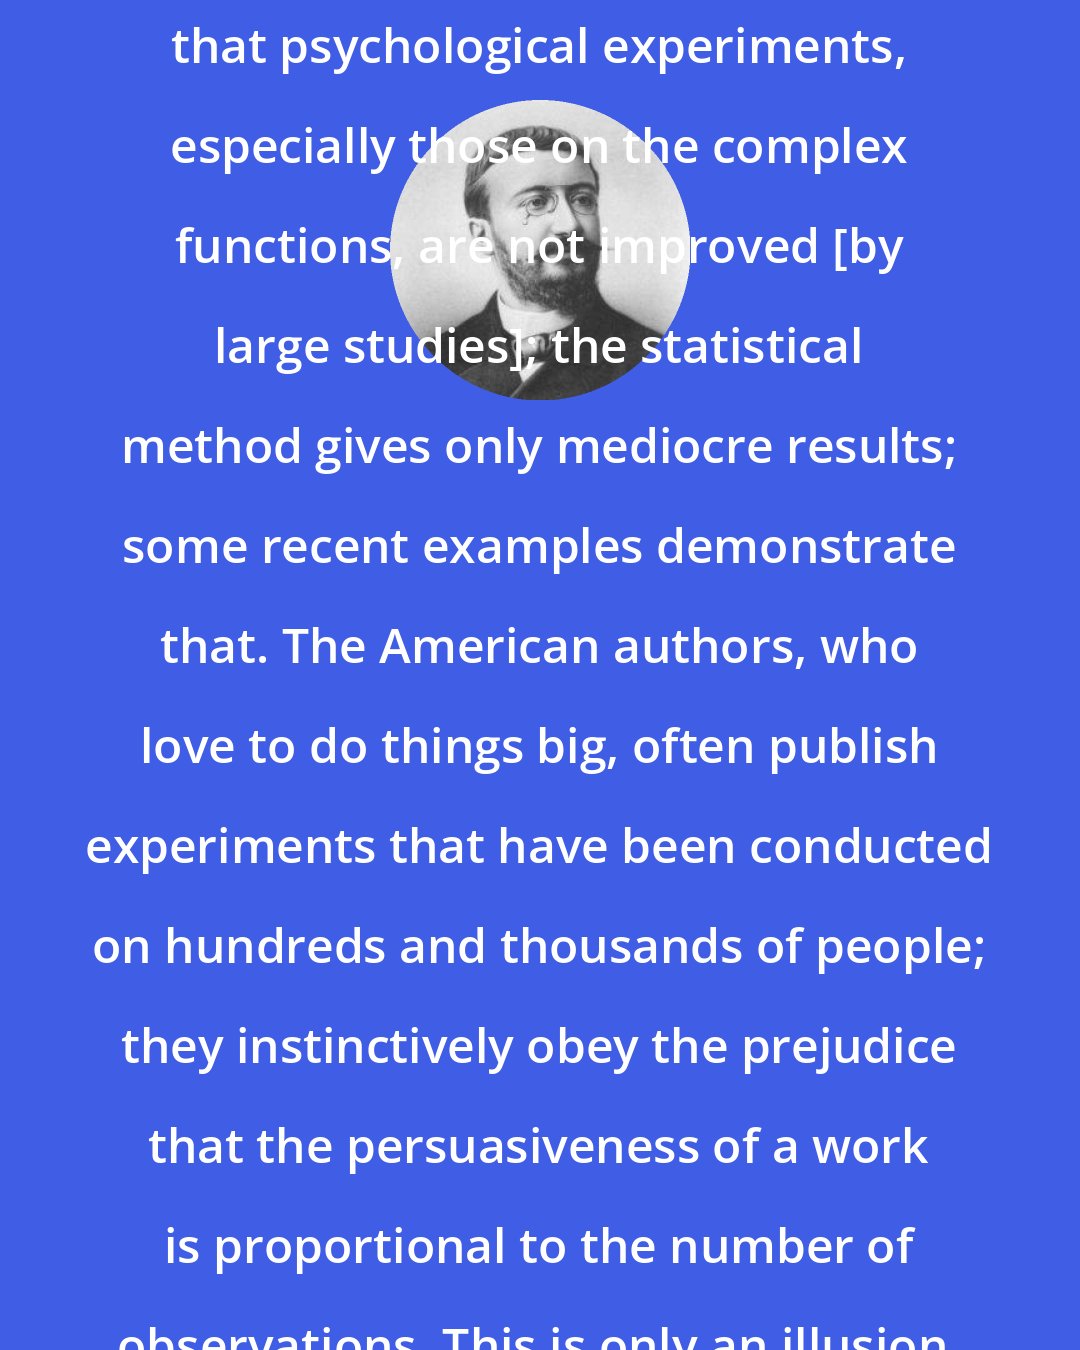 Alfred Binet: I wish that one would be persuaded that psychological experiments, especially those on the complex functions, are not improved [by large studies]; the statistical method gives only mediocre results; some recent examples demonstrate that. The American authors, who love to do things big, often publish experiments that have been conducted on hundreds and thousands of people; they instinctively obey the prejudice that the persuasiveness of a work is proportional to the number of observations. This is only an illusion.